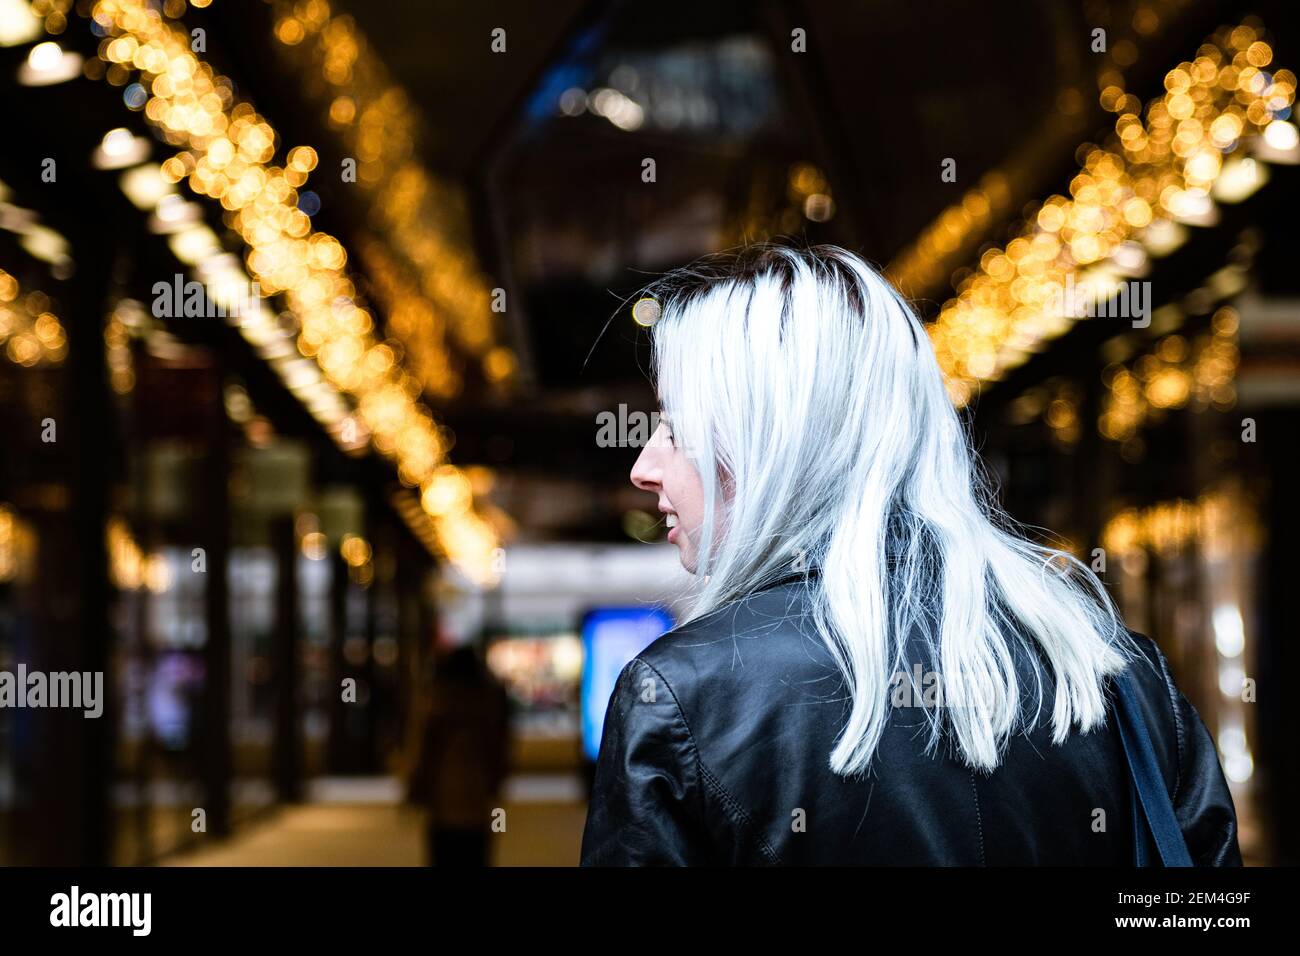 Fashion student shopping at Christmas time in London shopping mall. Stock Photo